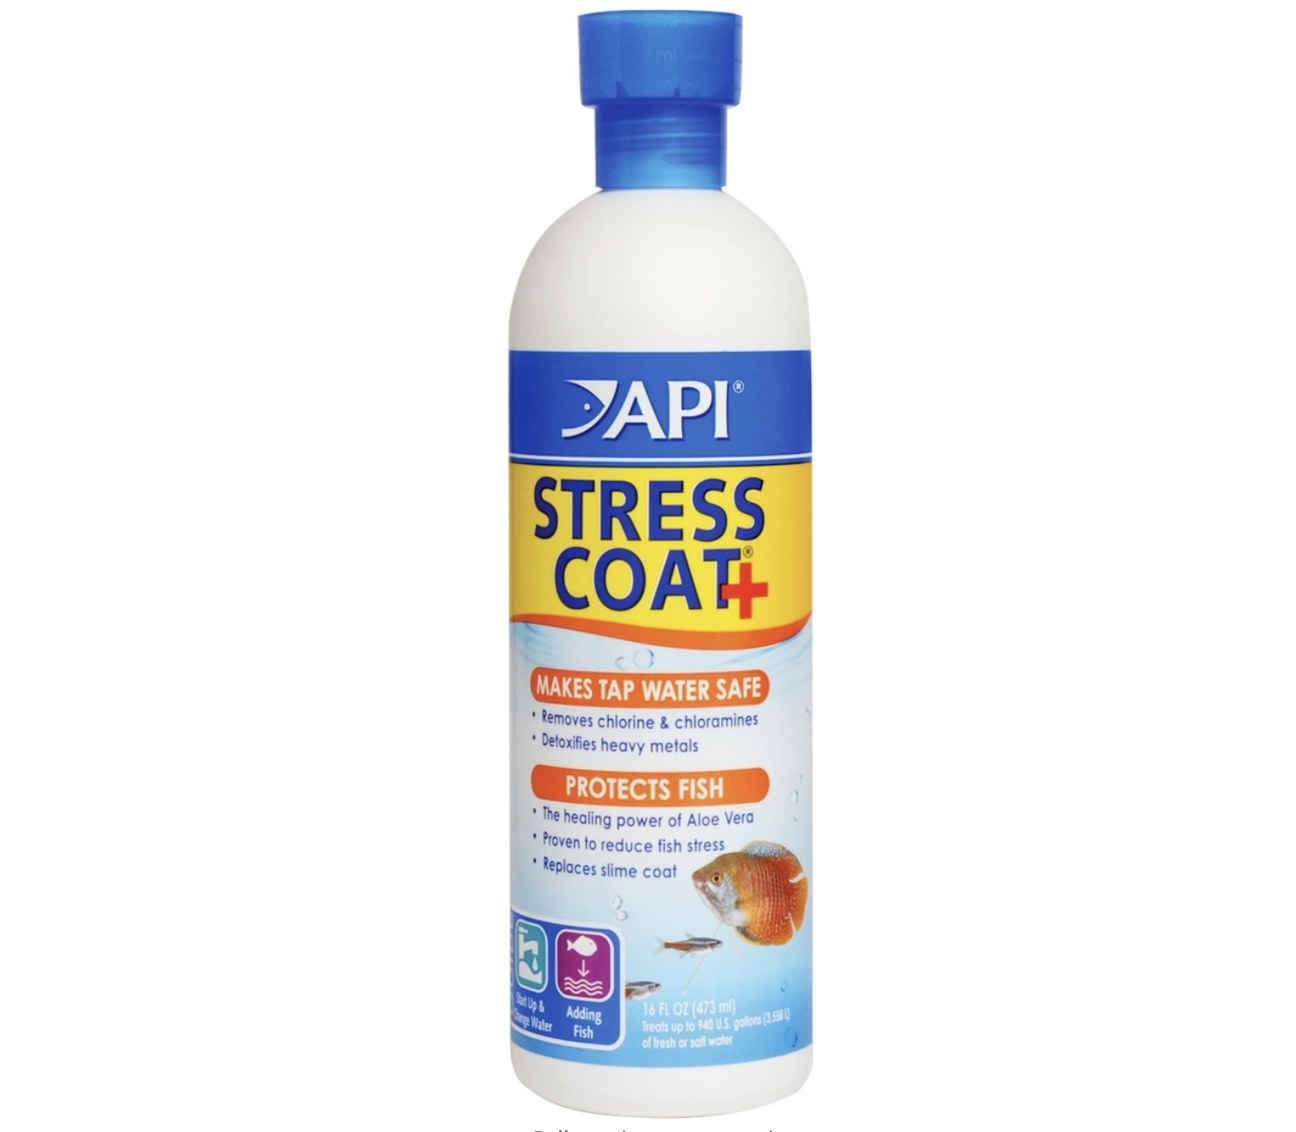 The bottle of coat conditioner 